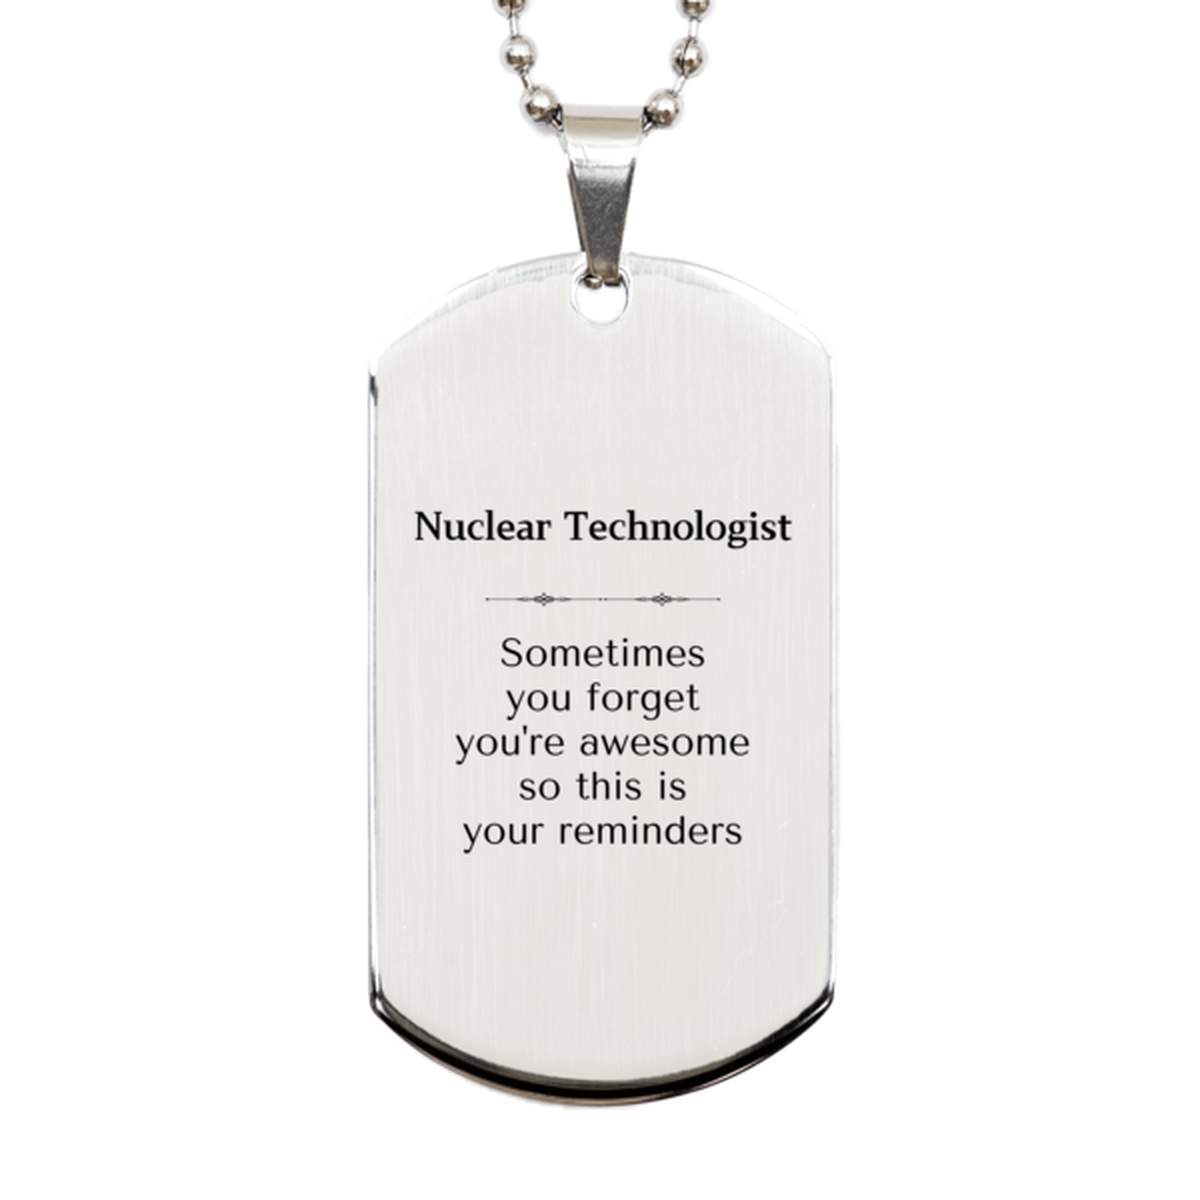 Sentimental Nuclear Technologist Silver Dog Tag, Nuclear Technologist Sometimes you forget you're awesome so this is your reminders, Graduation Christmas Birthday Gifts for Nuclear Technologist, Men, Women, Coworkers